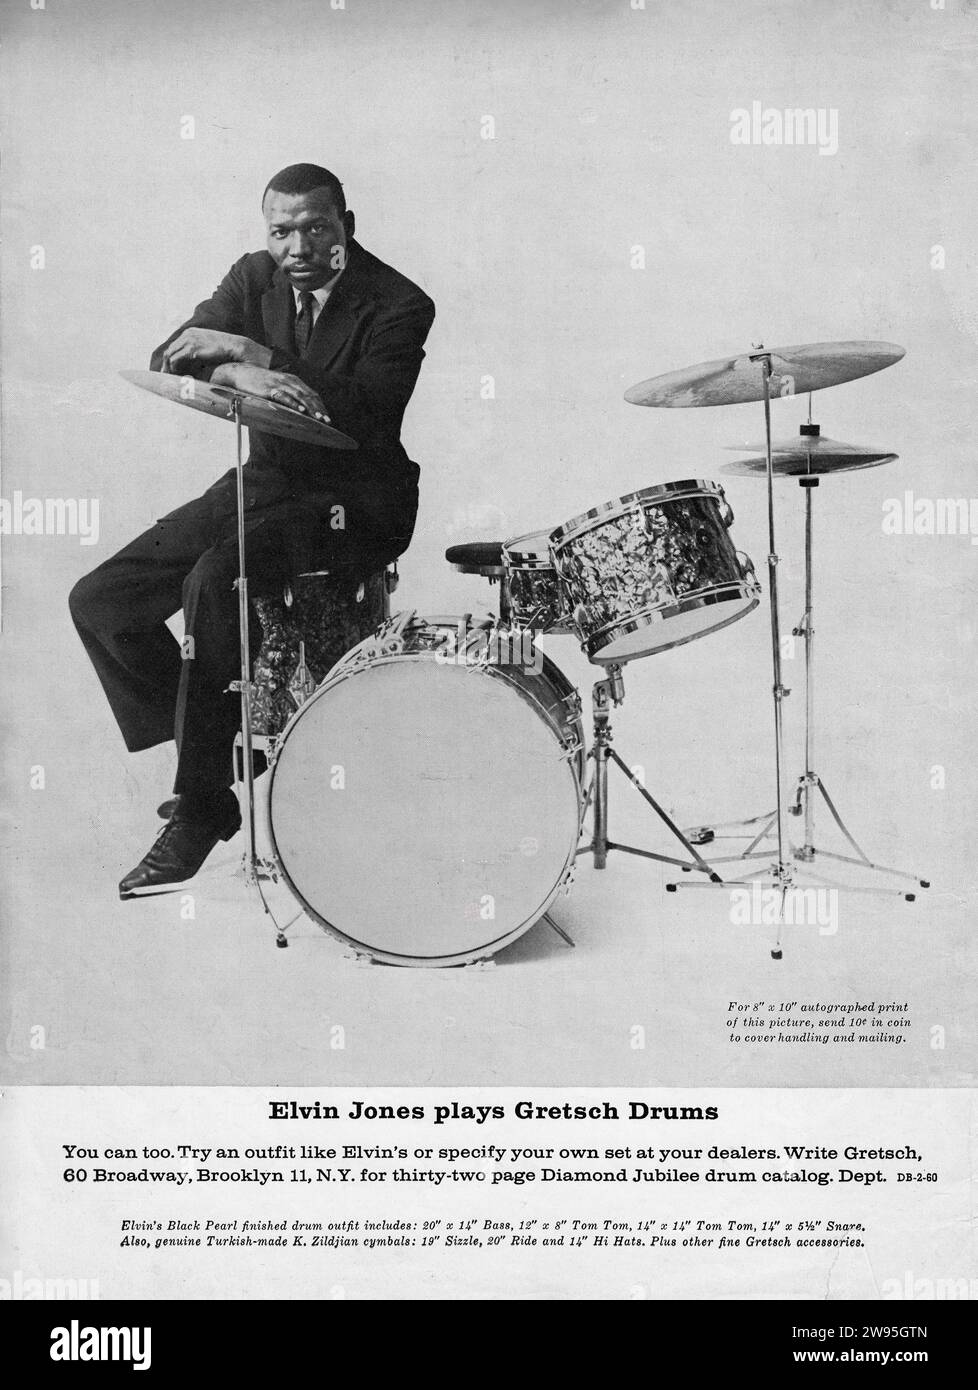 A full page ad for Gretsch Drums from a 1960's American music magazine featuring jazz drummer Elvin Jones. From a mid 1960s music magazine. Stock Photo